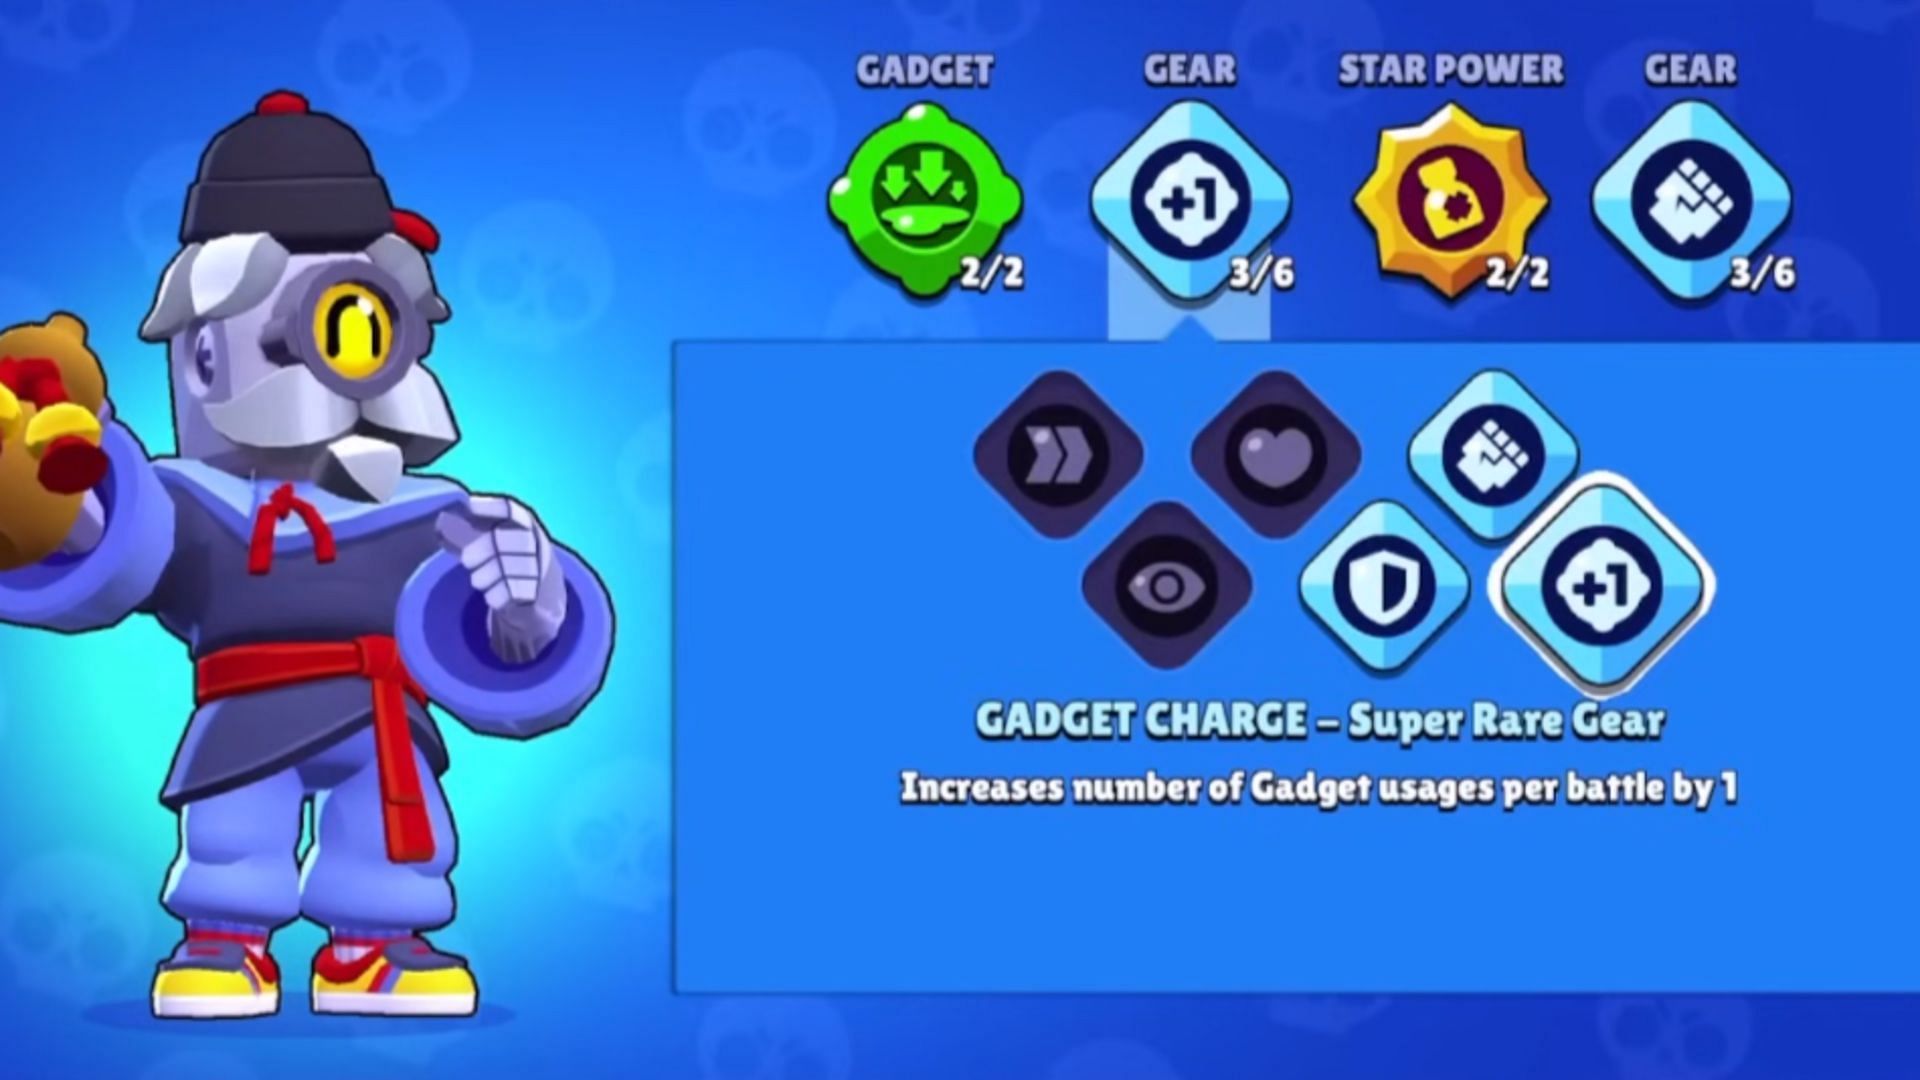 Gadget Charge Gear (Image via Supercell)